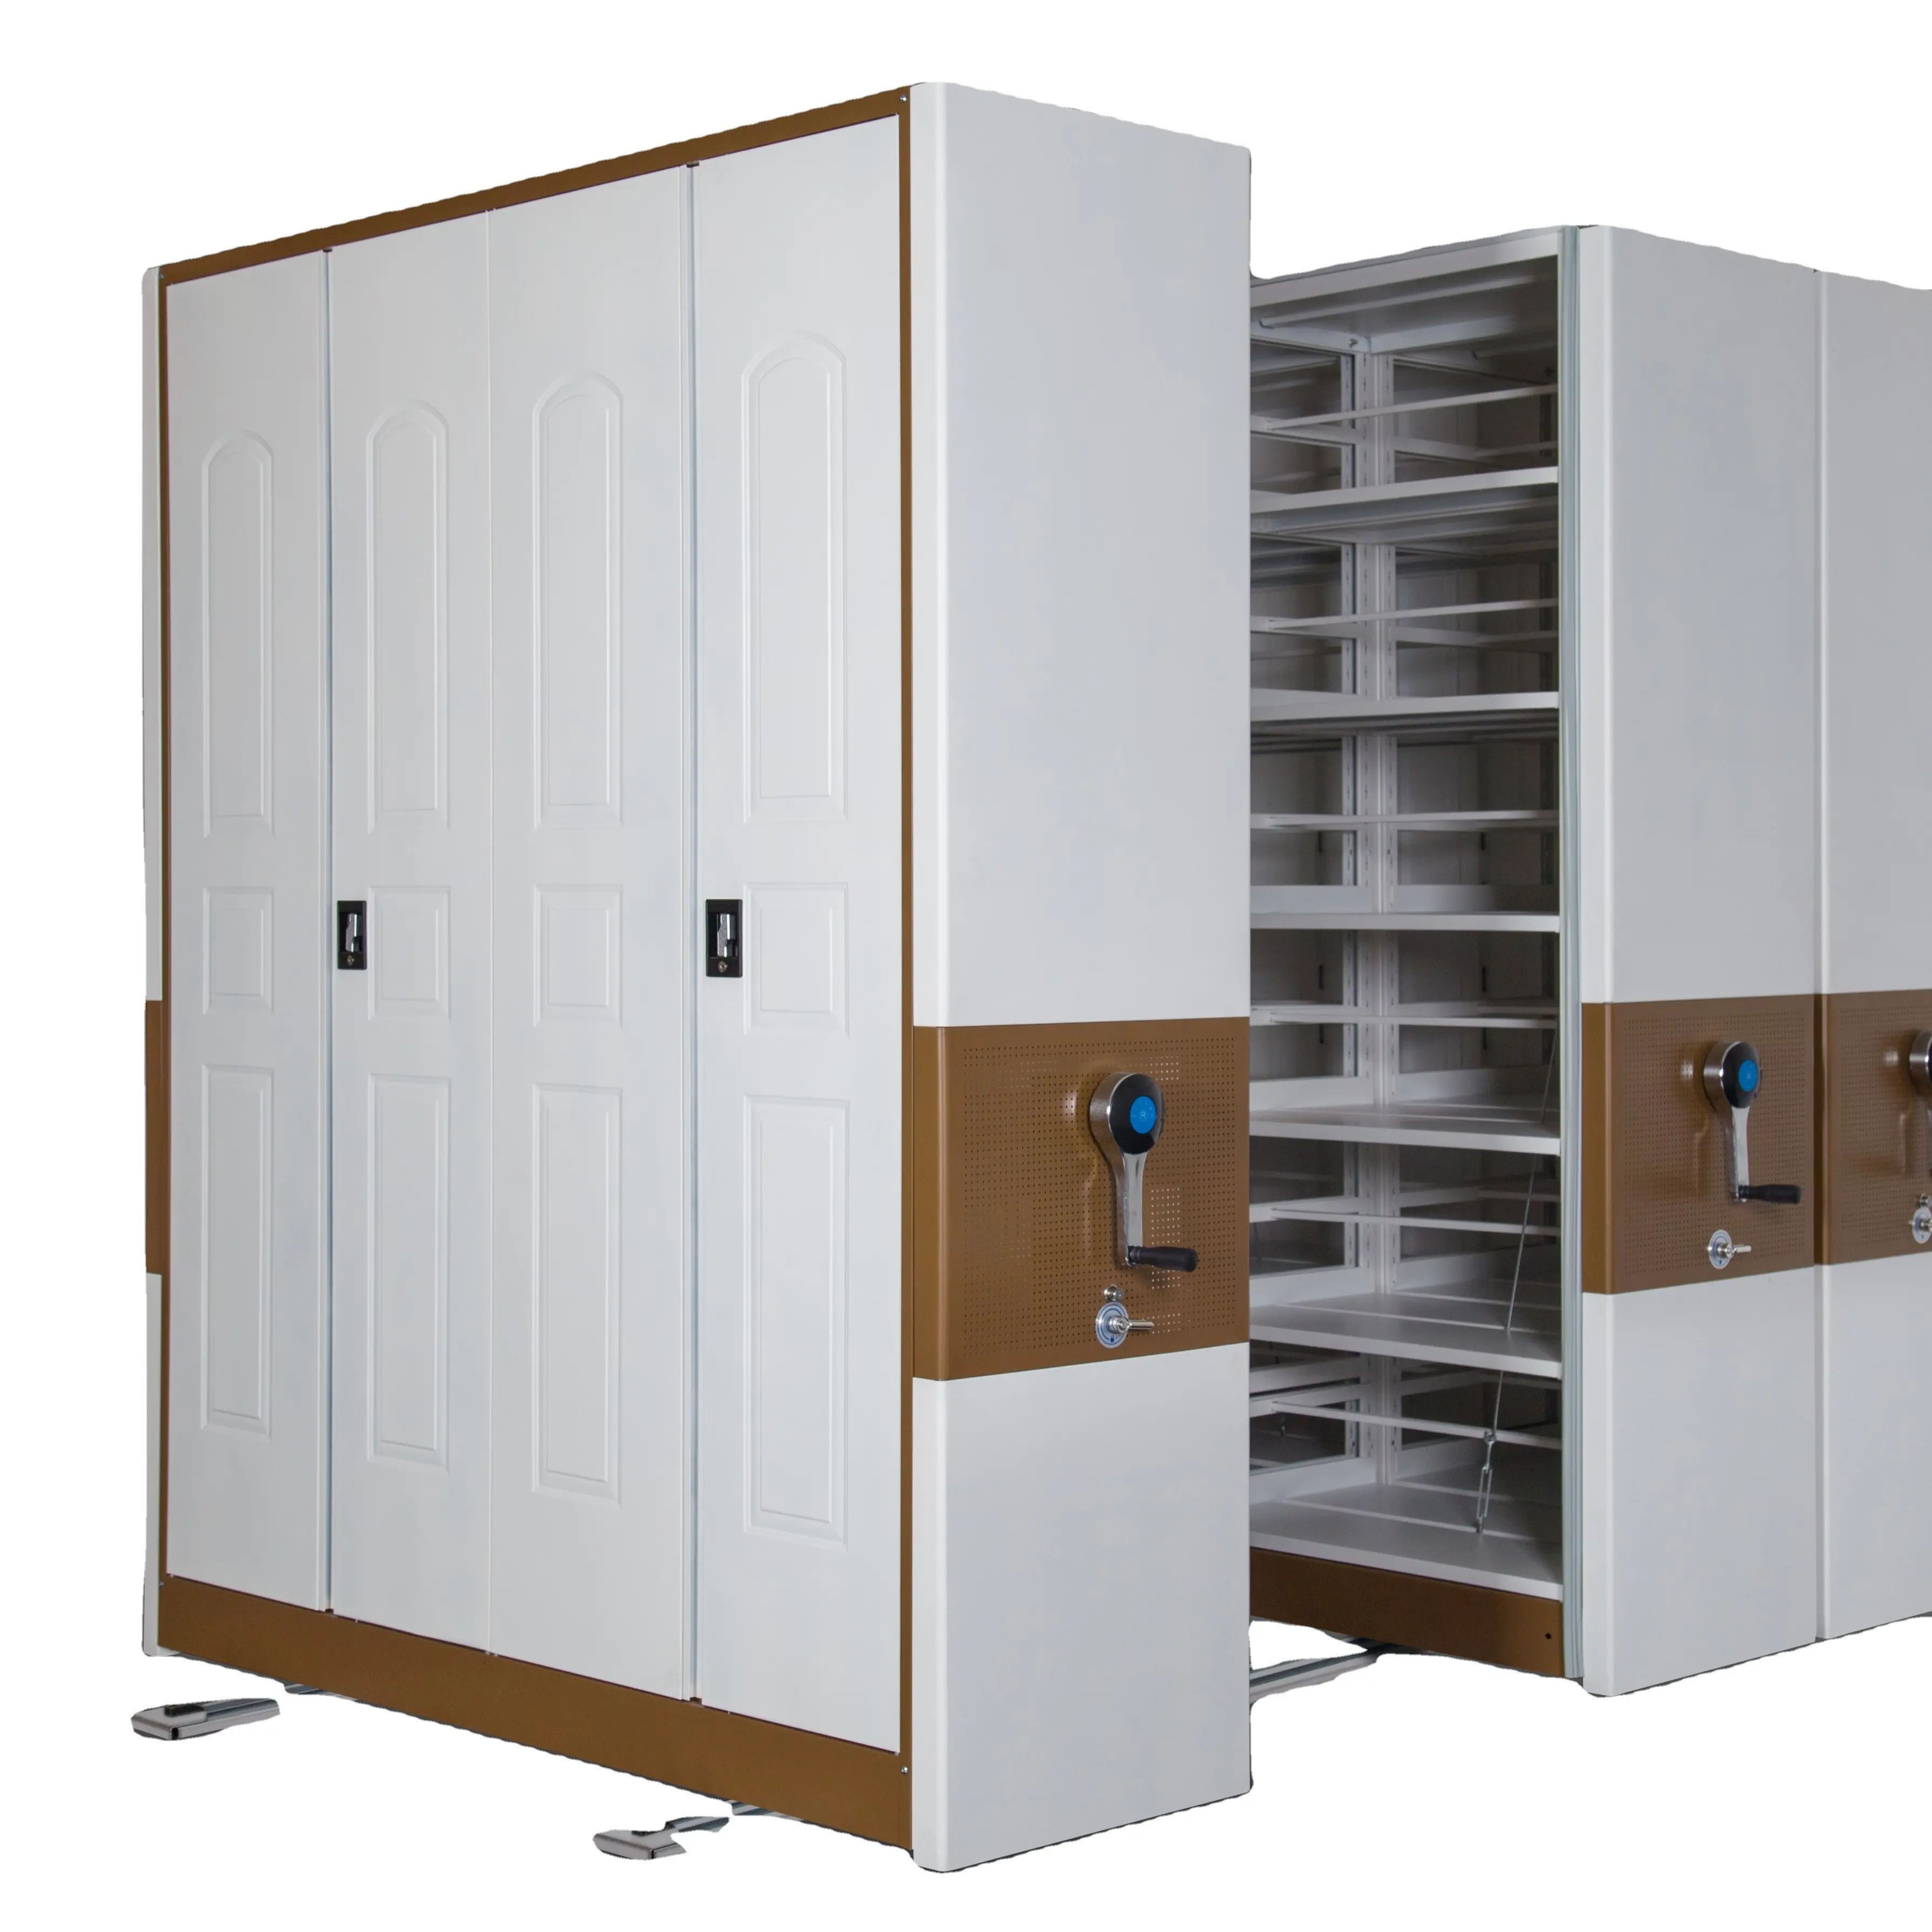 High density metal archive cabinets manual mobile compactor automation digital convenient